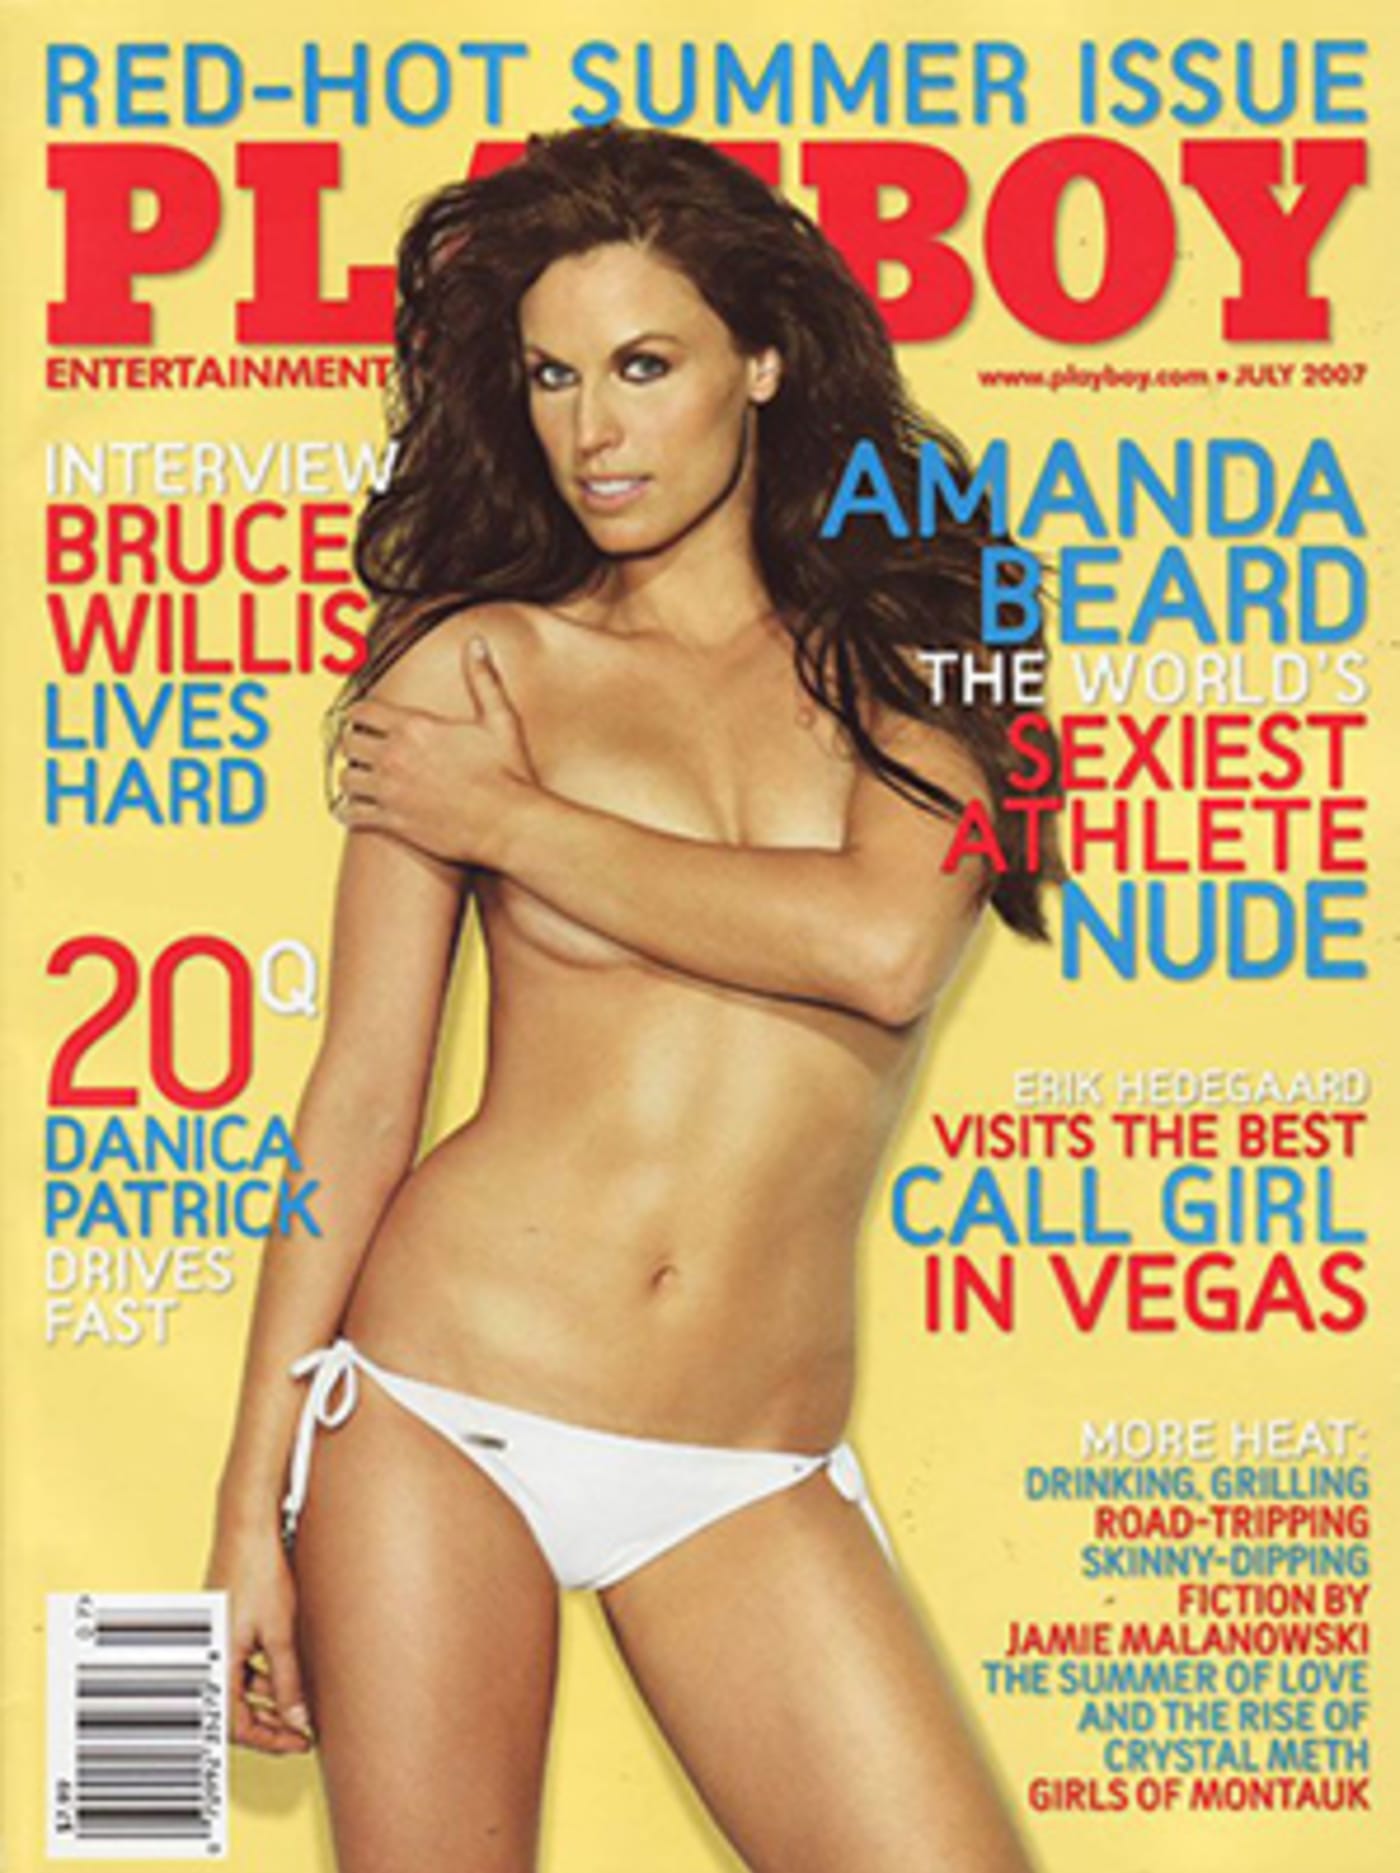 Playboy Nudes By The Hottest Celebrities: 50 Celebrities Who Posed Naked  For The Magazine | Complex